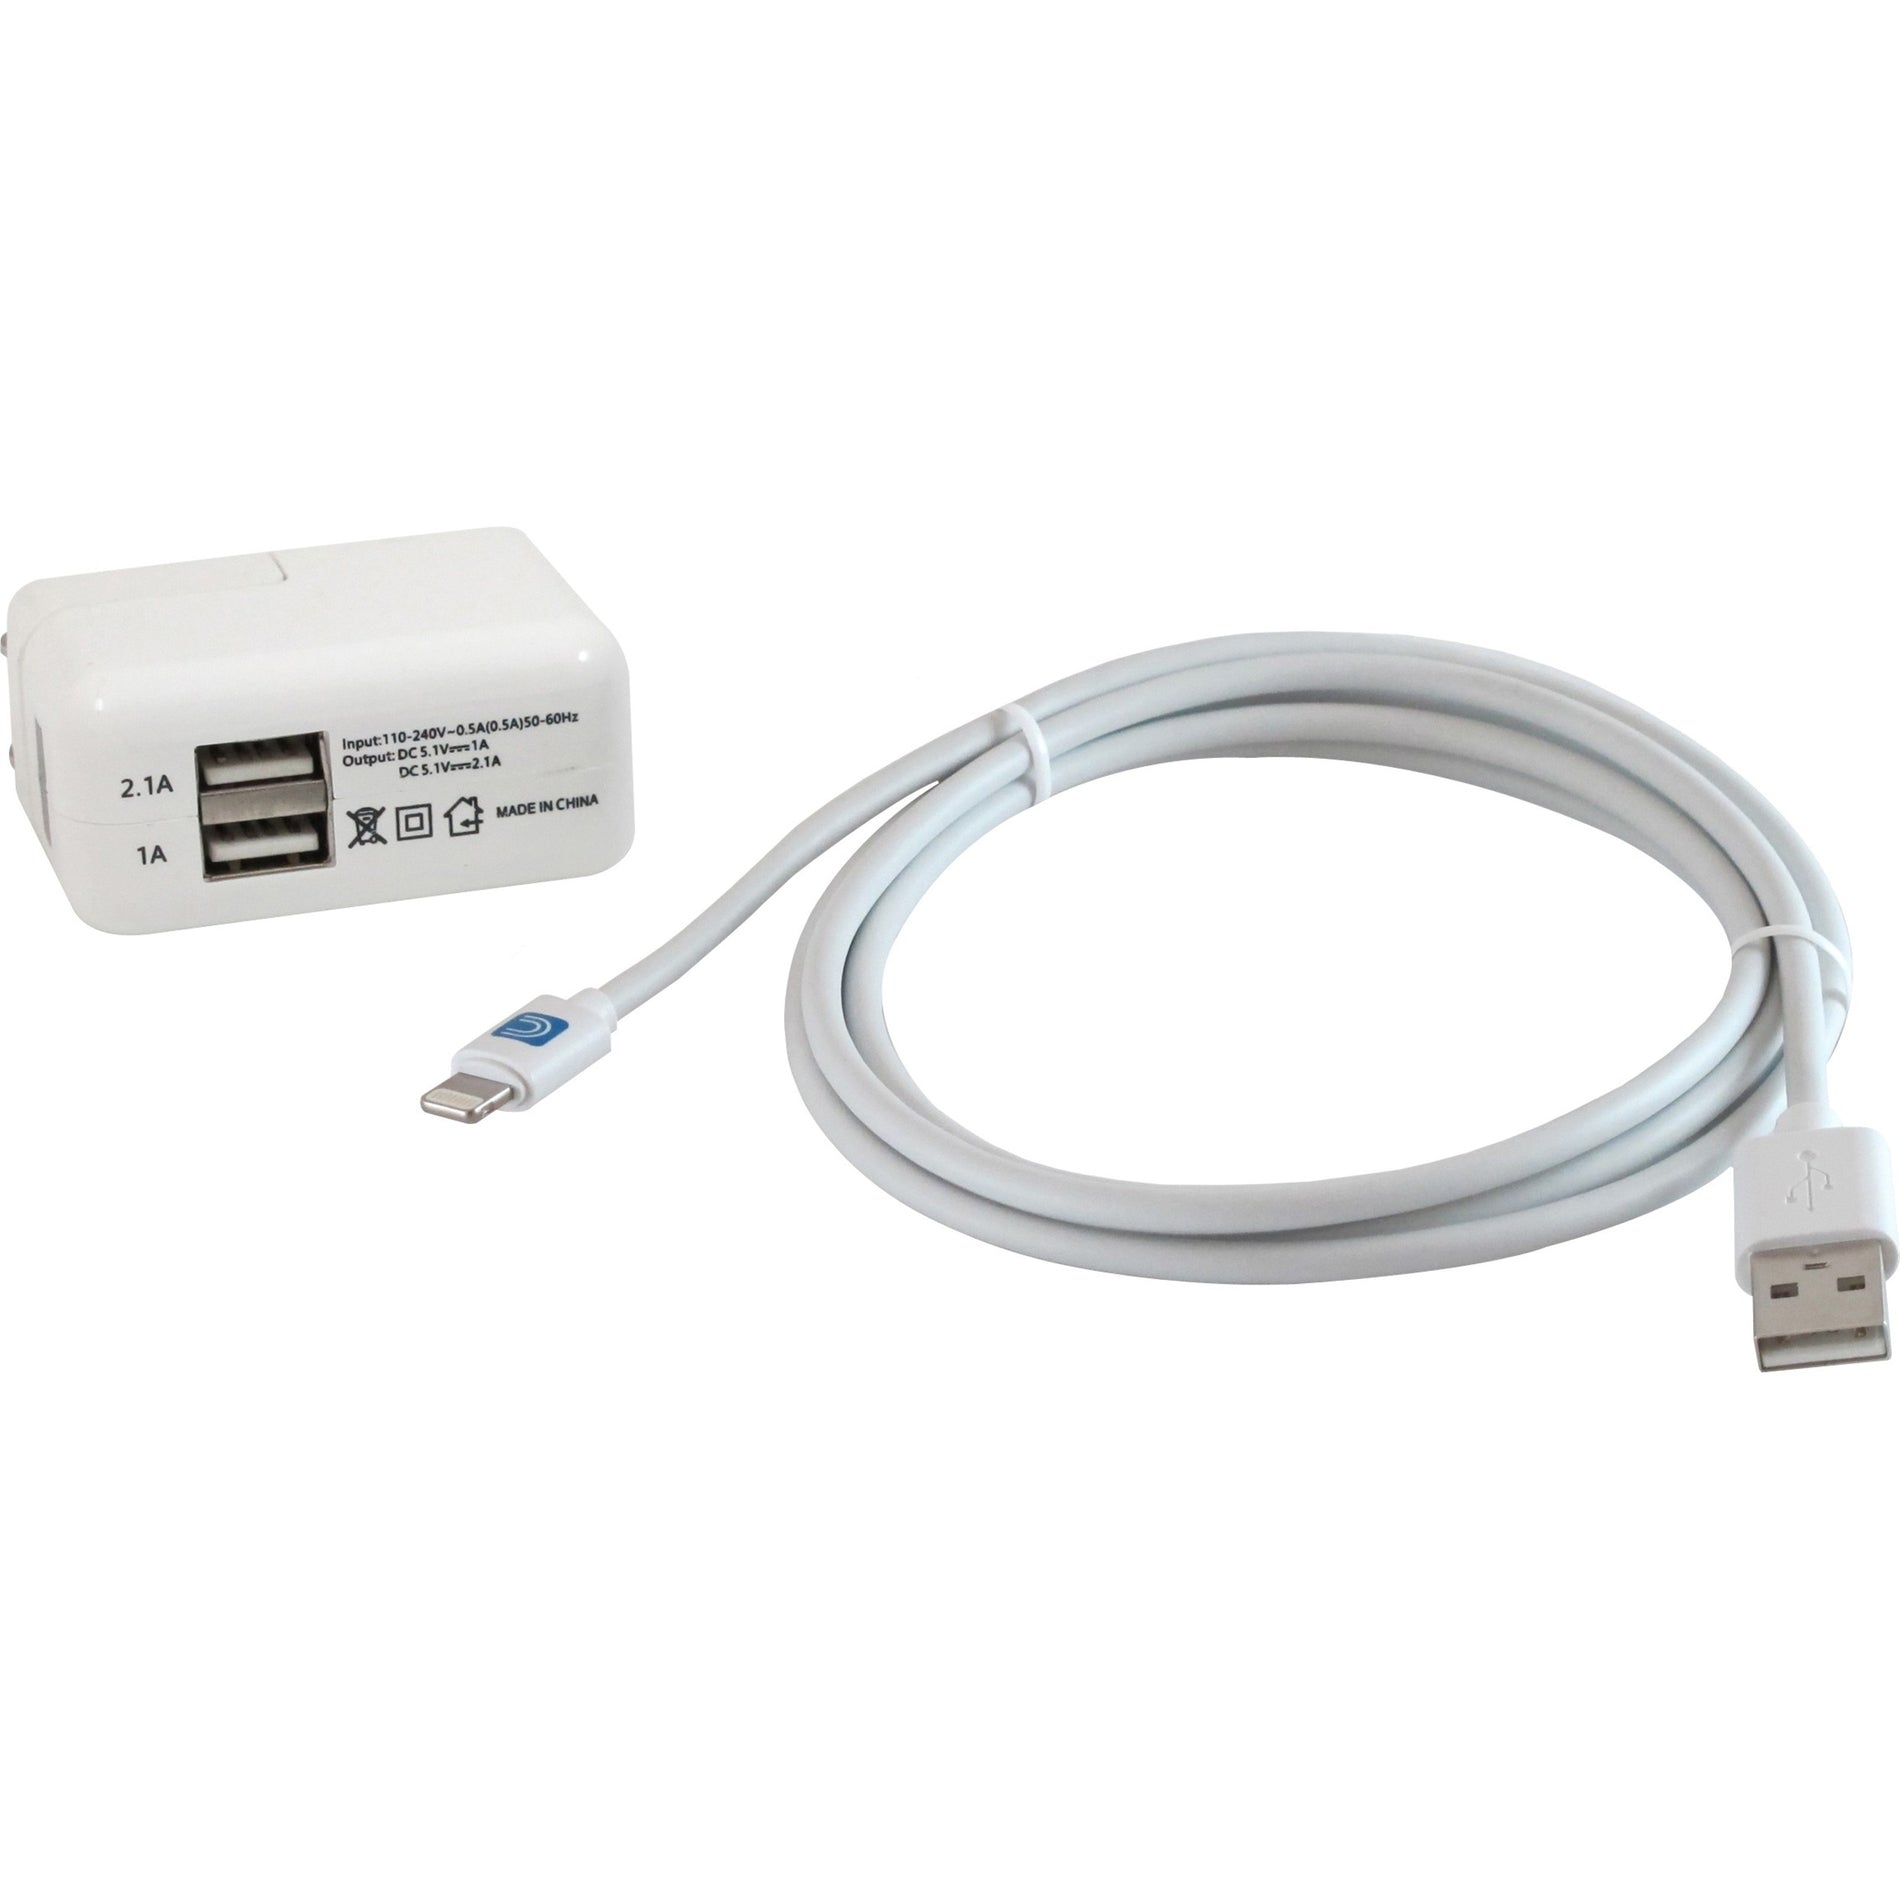 Comprehensive CCK-I01 Lightning Connectivity Kit, 6ft Lightning Cable, Dual USB Wall Charger 2.1A/12 Watt